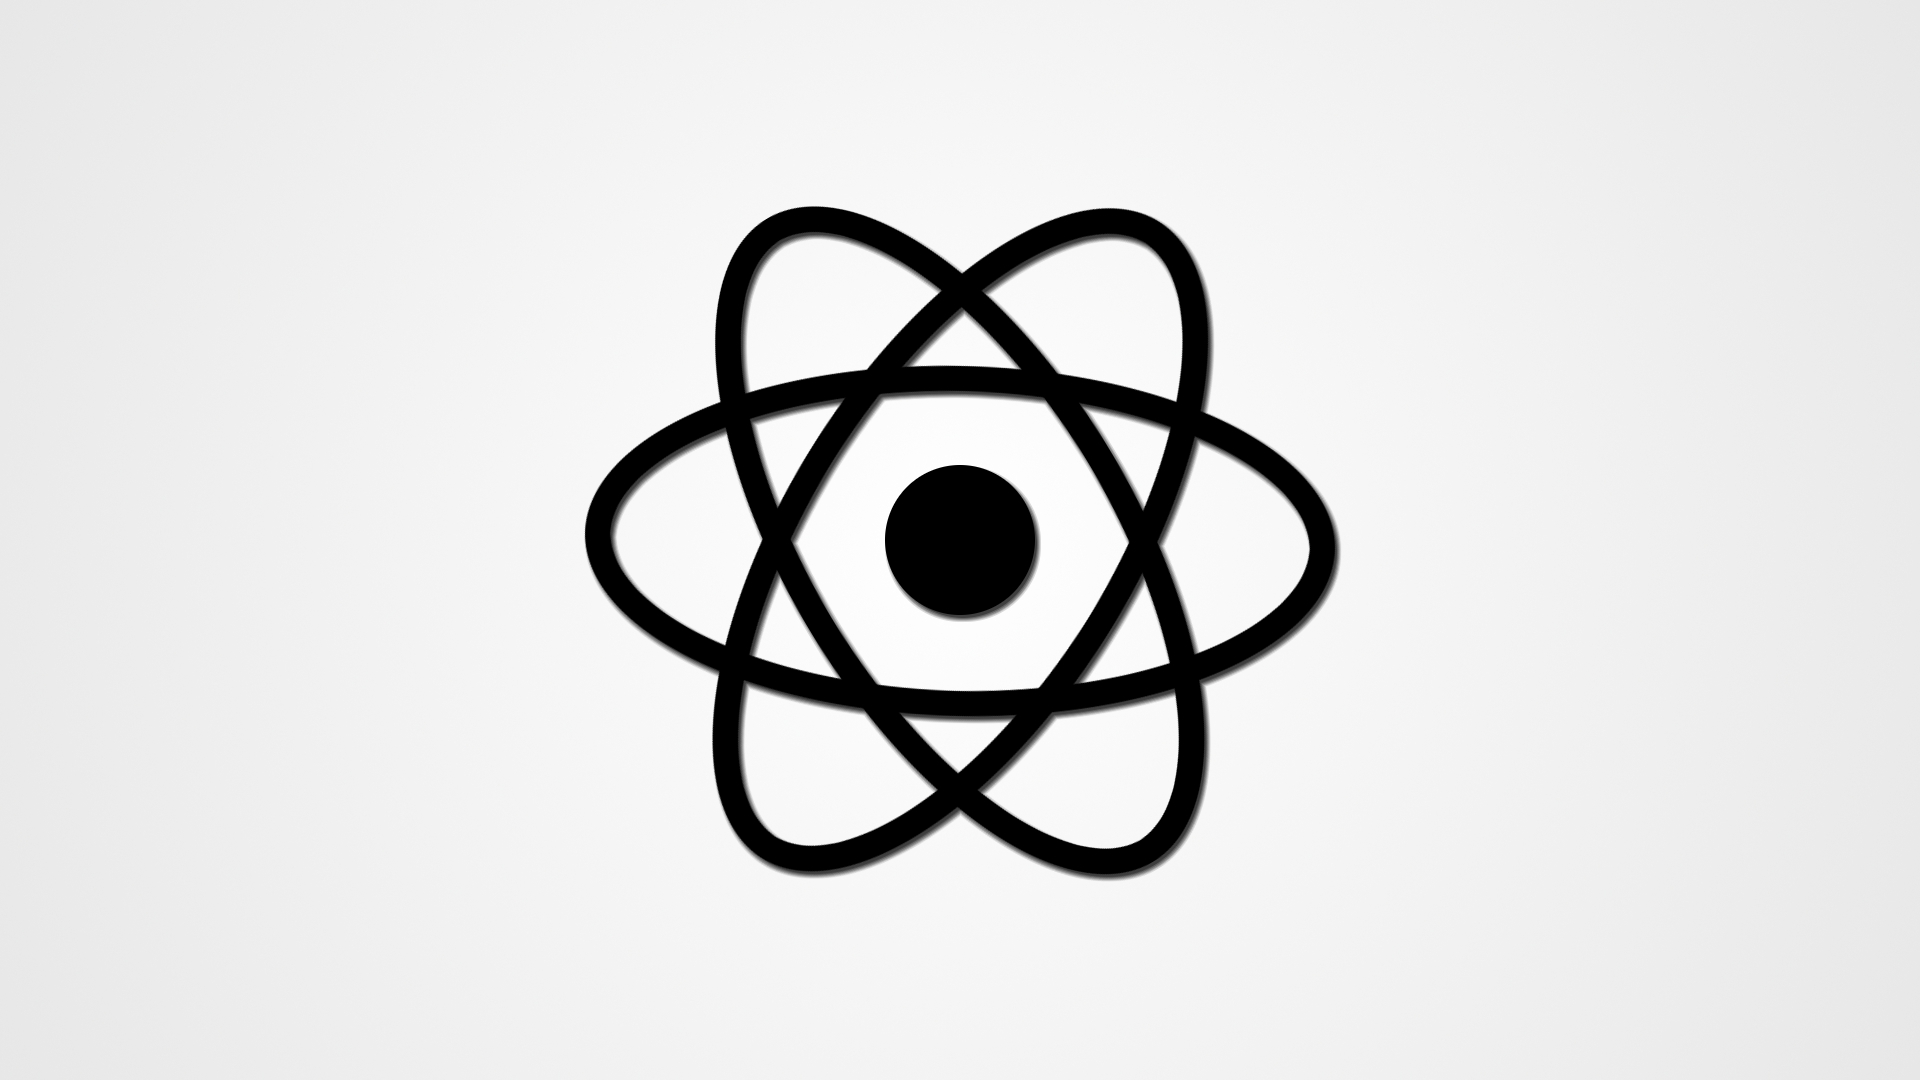 Free download Atom Wallpaper White by MeSkullZ [1920x1080] for your